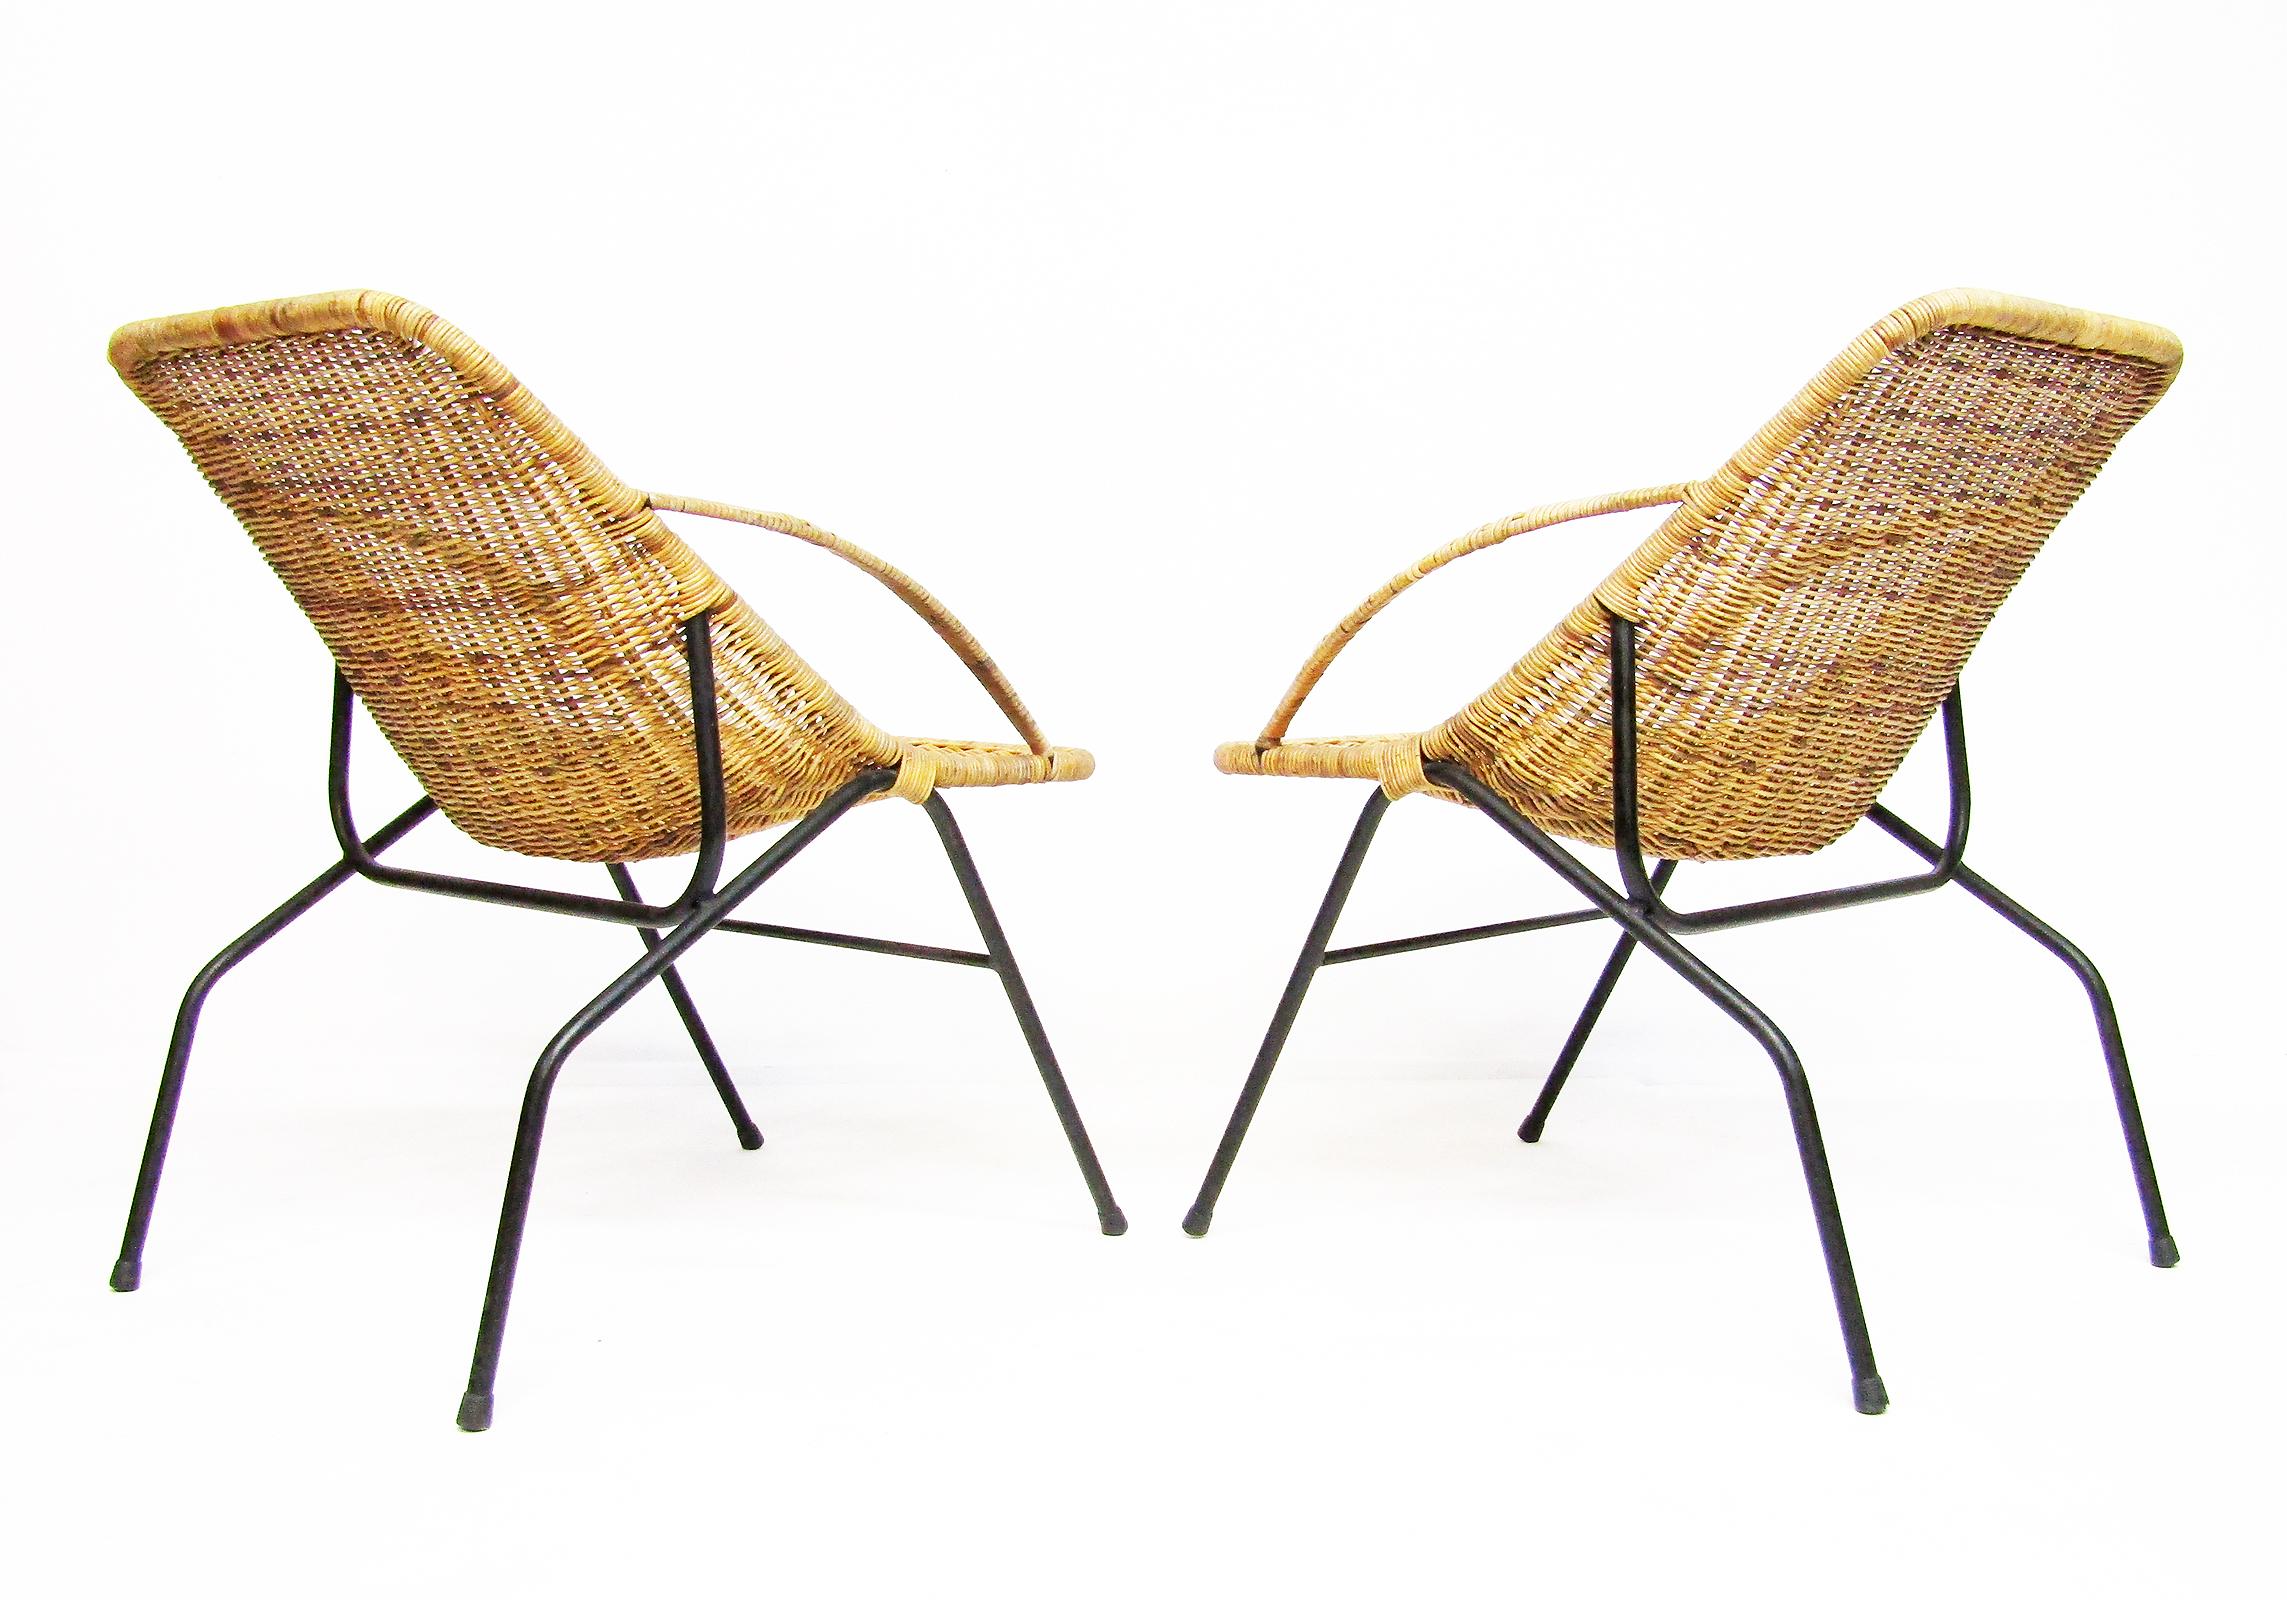 A pair of graceful 1950s French armchairs in rattan wicker and tubular steel, in the style of Jaques Adnet.

The dynamic modernist frame evokes gazelle's legs, the wicker seats providing strong support and ergonomic comfort.

With patina